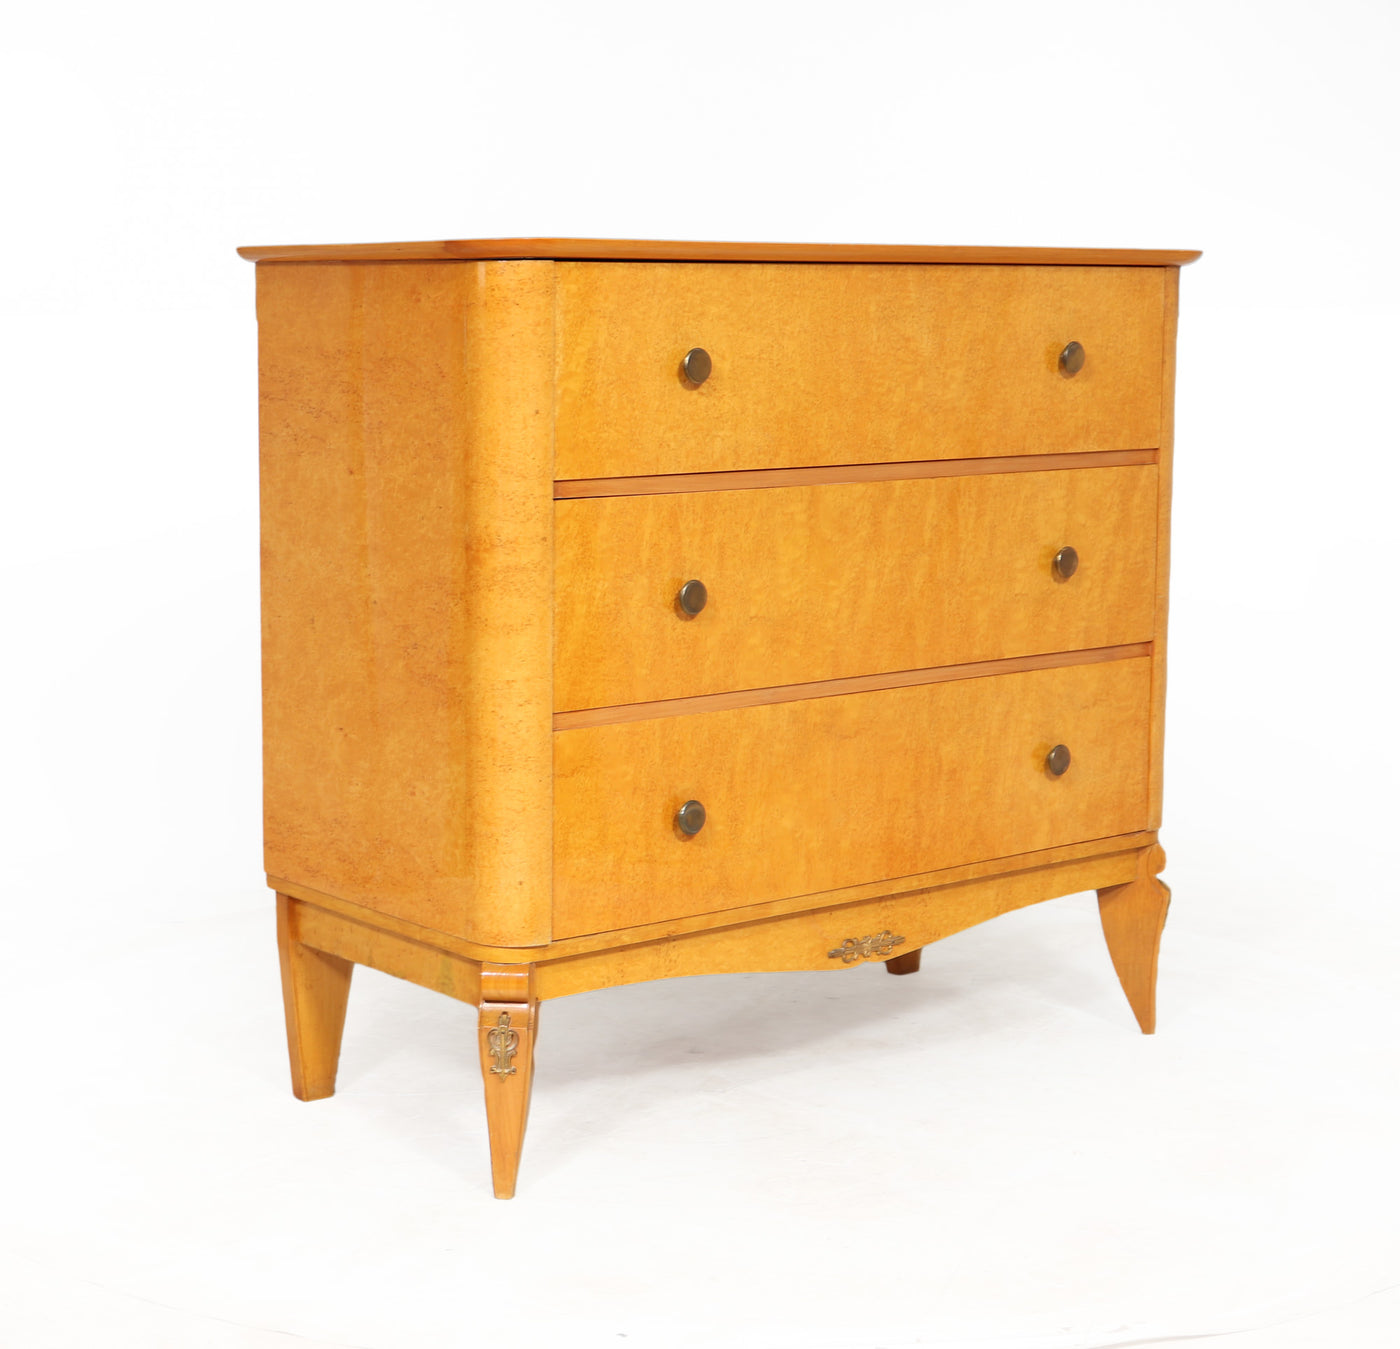 Vintage Chest of Drawers in Karelian Birch side